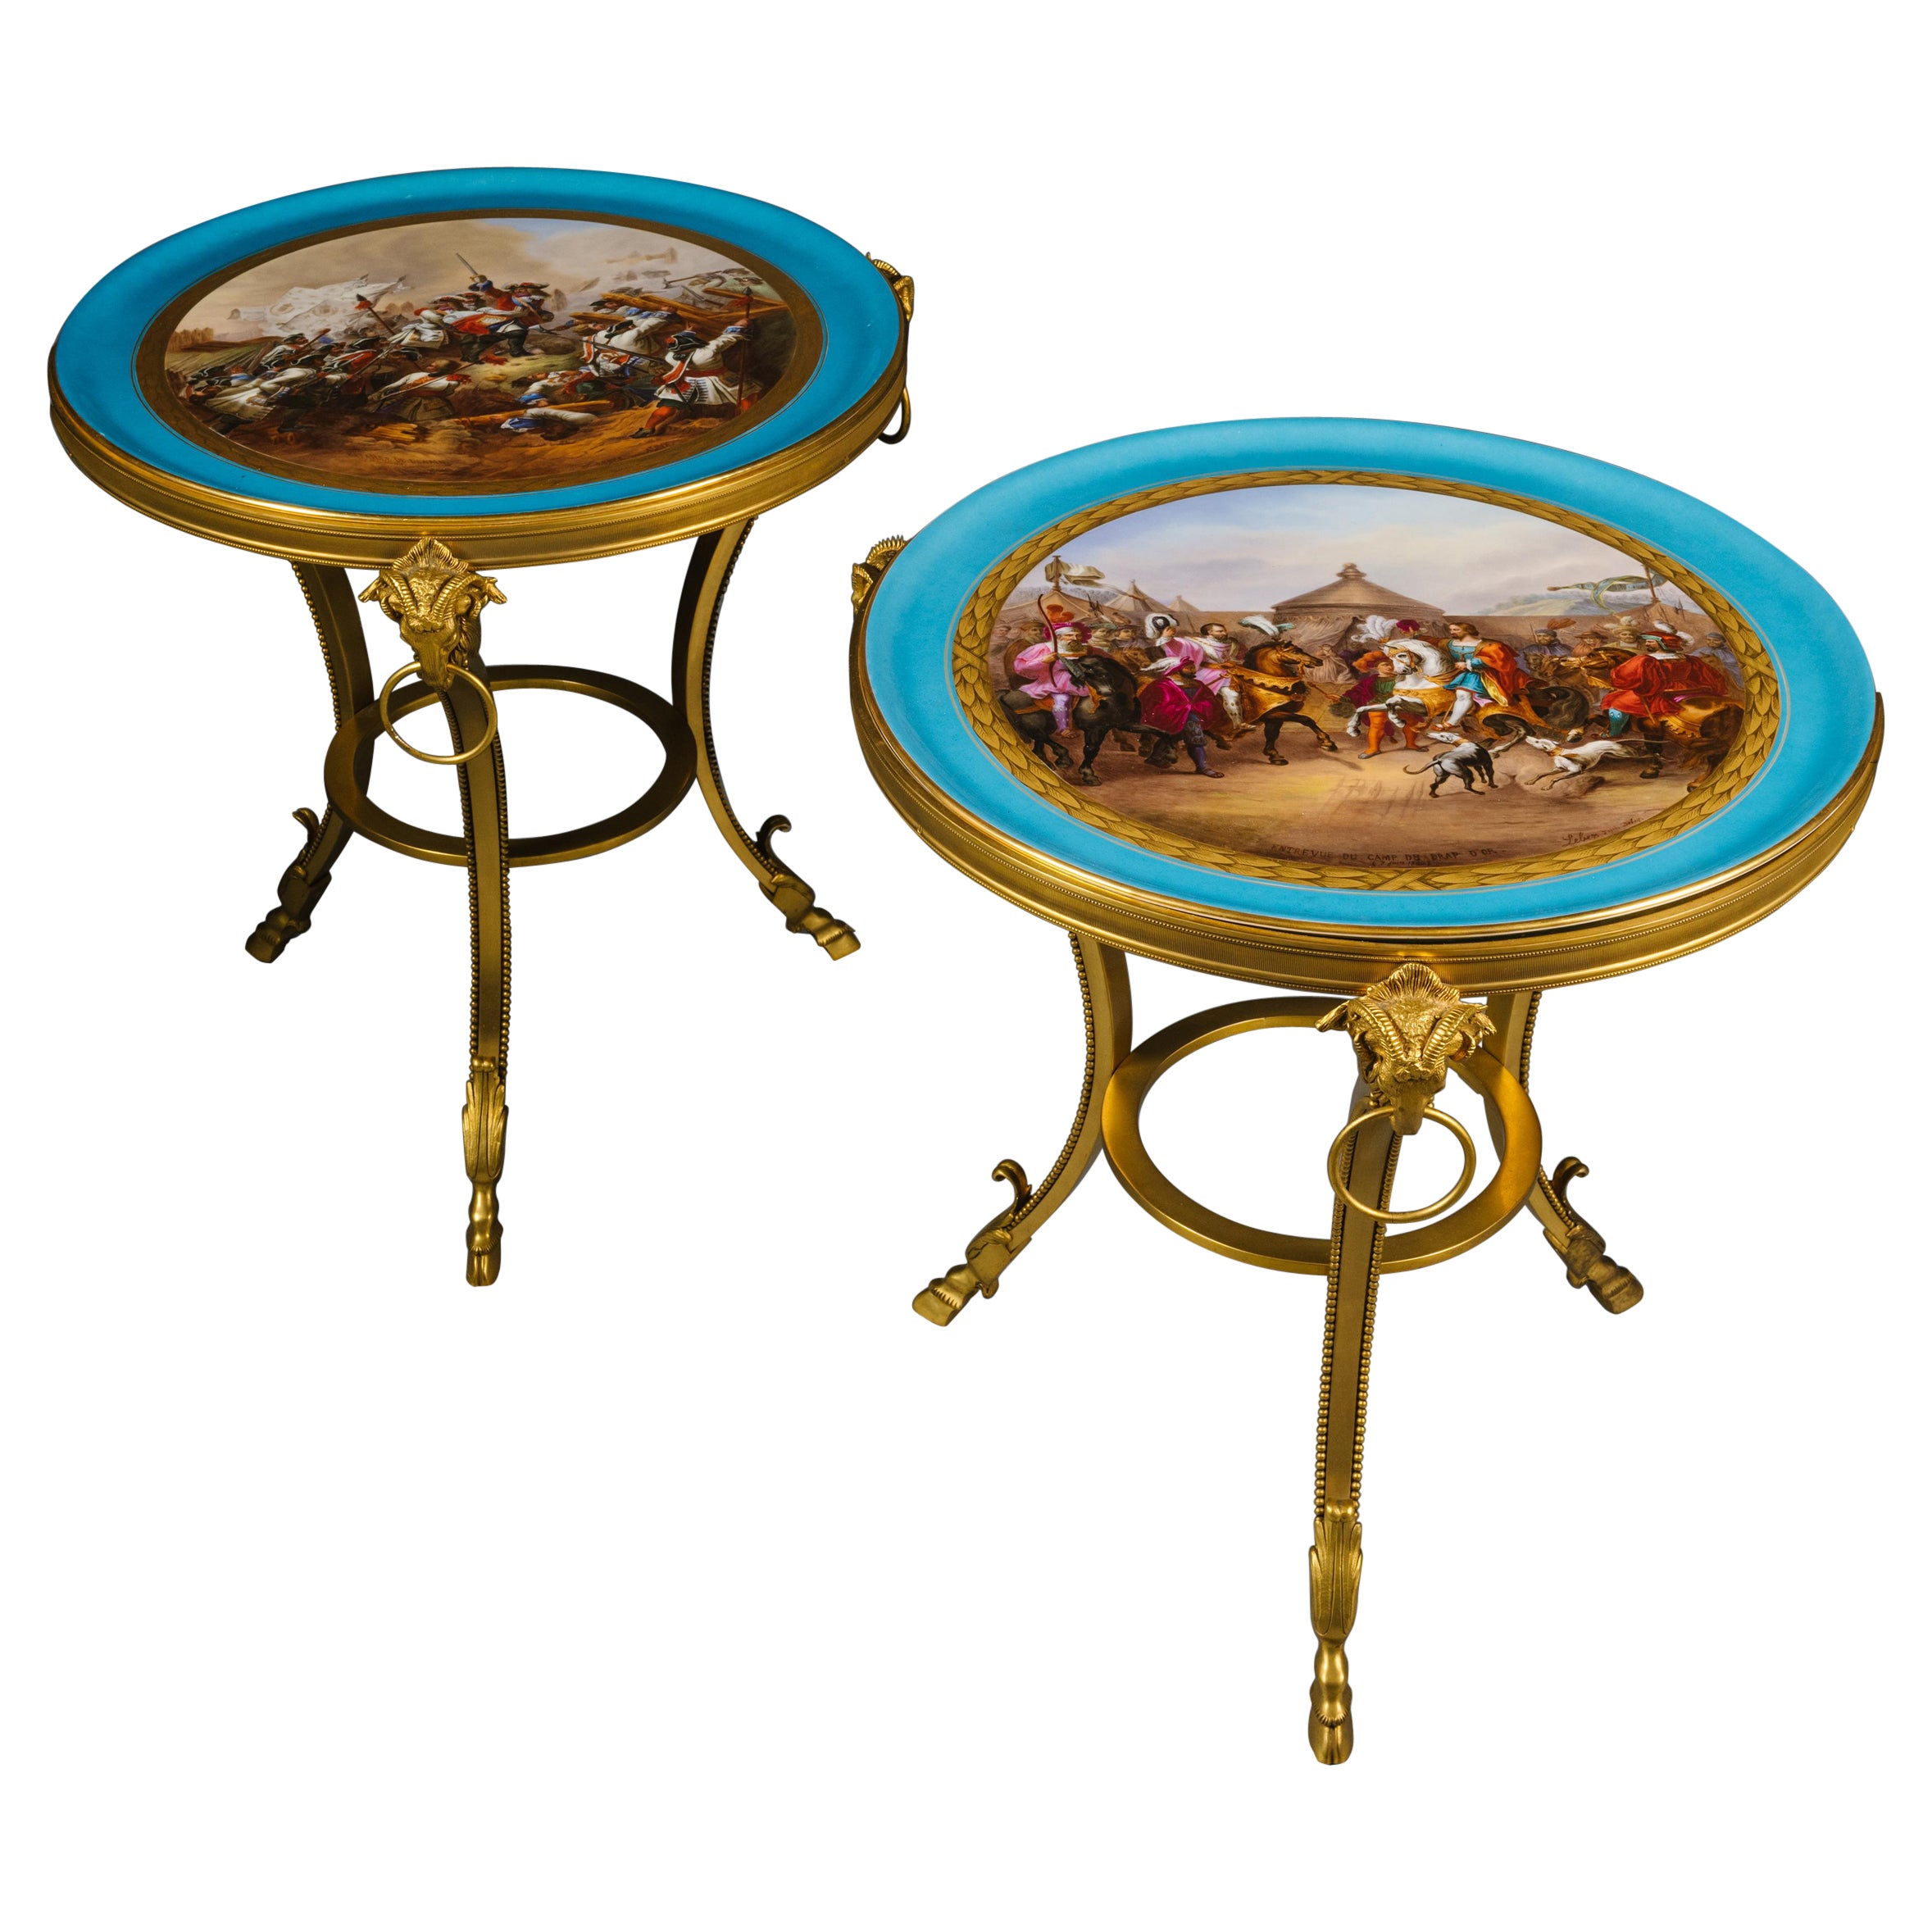 A Pair of Louis XVI Style Gilt-Bronze and Porcelain Low Side Tables